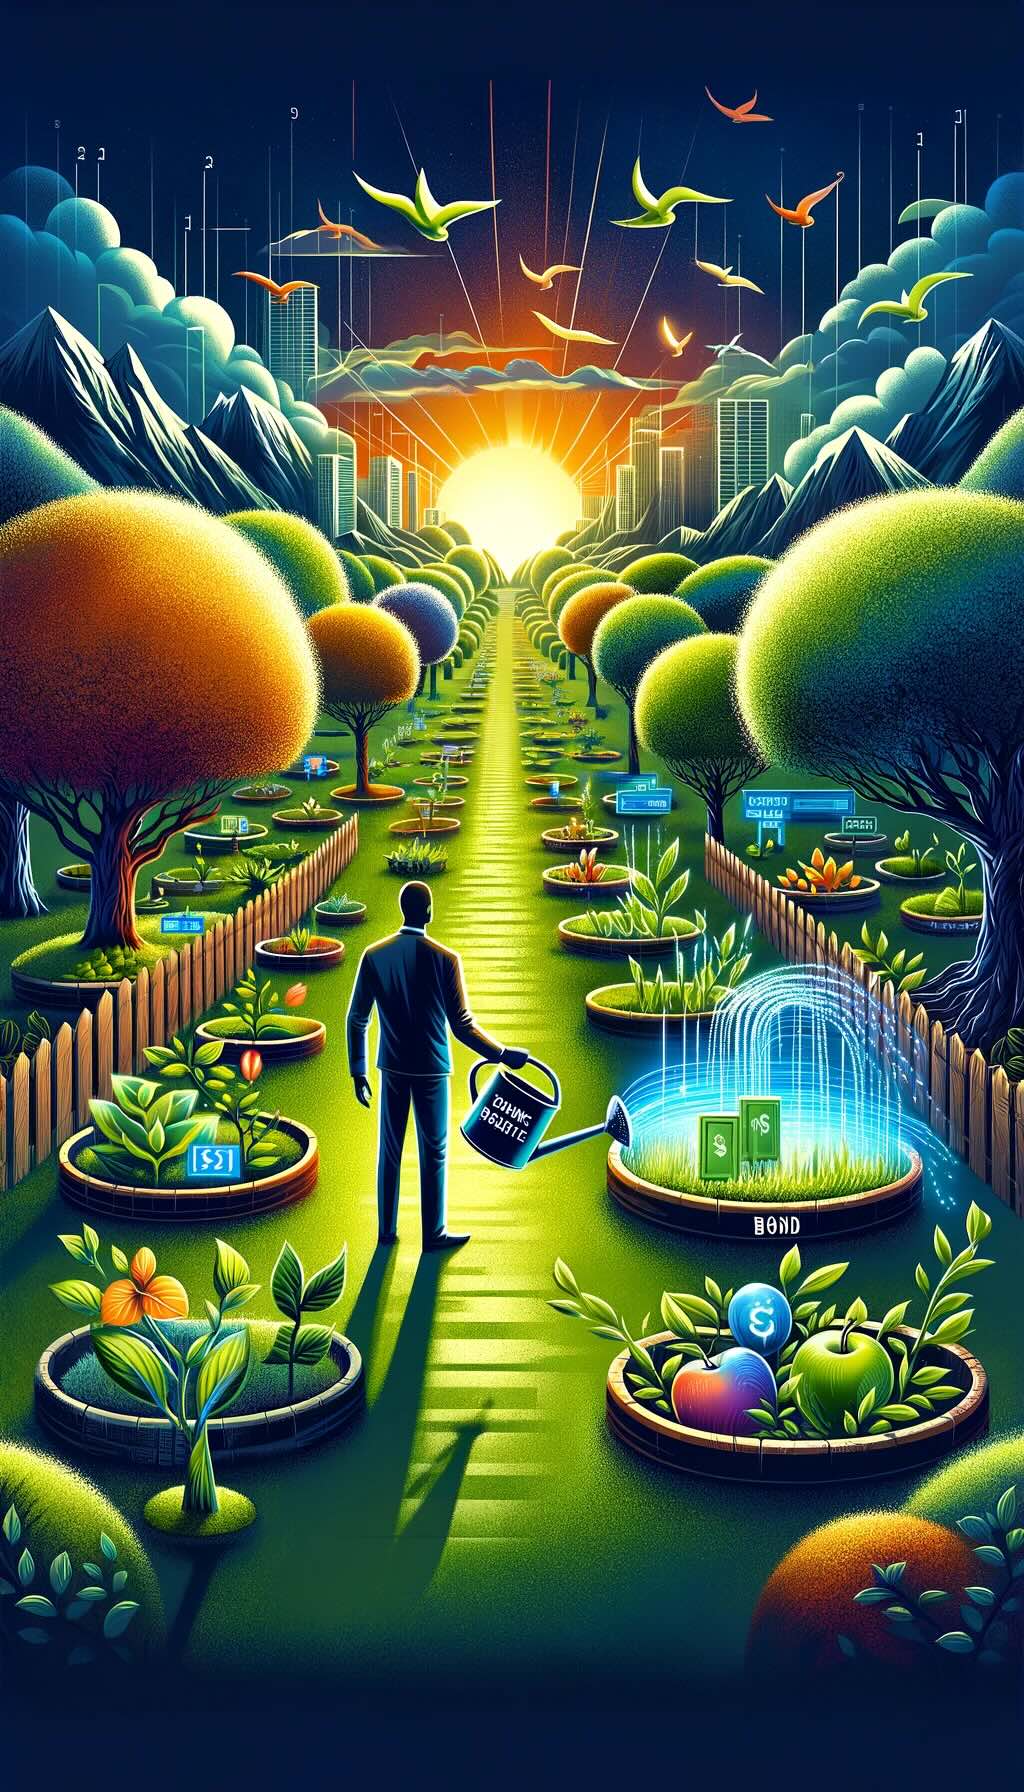 Role of bonds in an investment portfolio, depicting an investor in a serene garden, where various plants and trees symbolize the diversity and stability bonds bring. The investor, watering these plants with a can marked 'Income & Stability', illustrates how bonds nurture a portfolio by providing financial security and steady income. Enclosed by a protective fence against market volatility, the garden path leads towards a sunny clearing, representing the achievement of long-term financial goals and peace of mind through strategic bond investment. This scene, rich in symbolism and vibrant detail, invites viewers to appreciate bonds' essential function in preserving capital and generating income within a well-rounded investment strategy. 